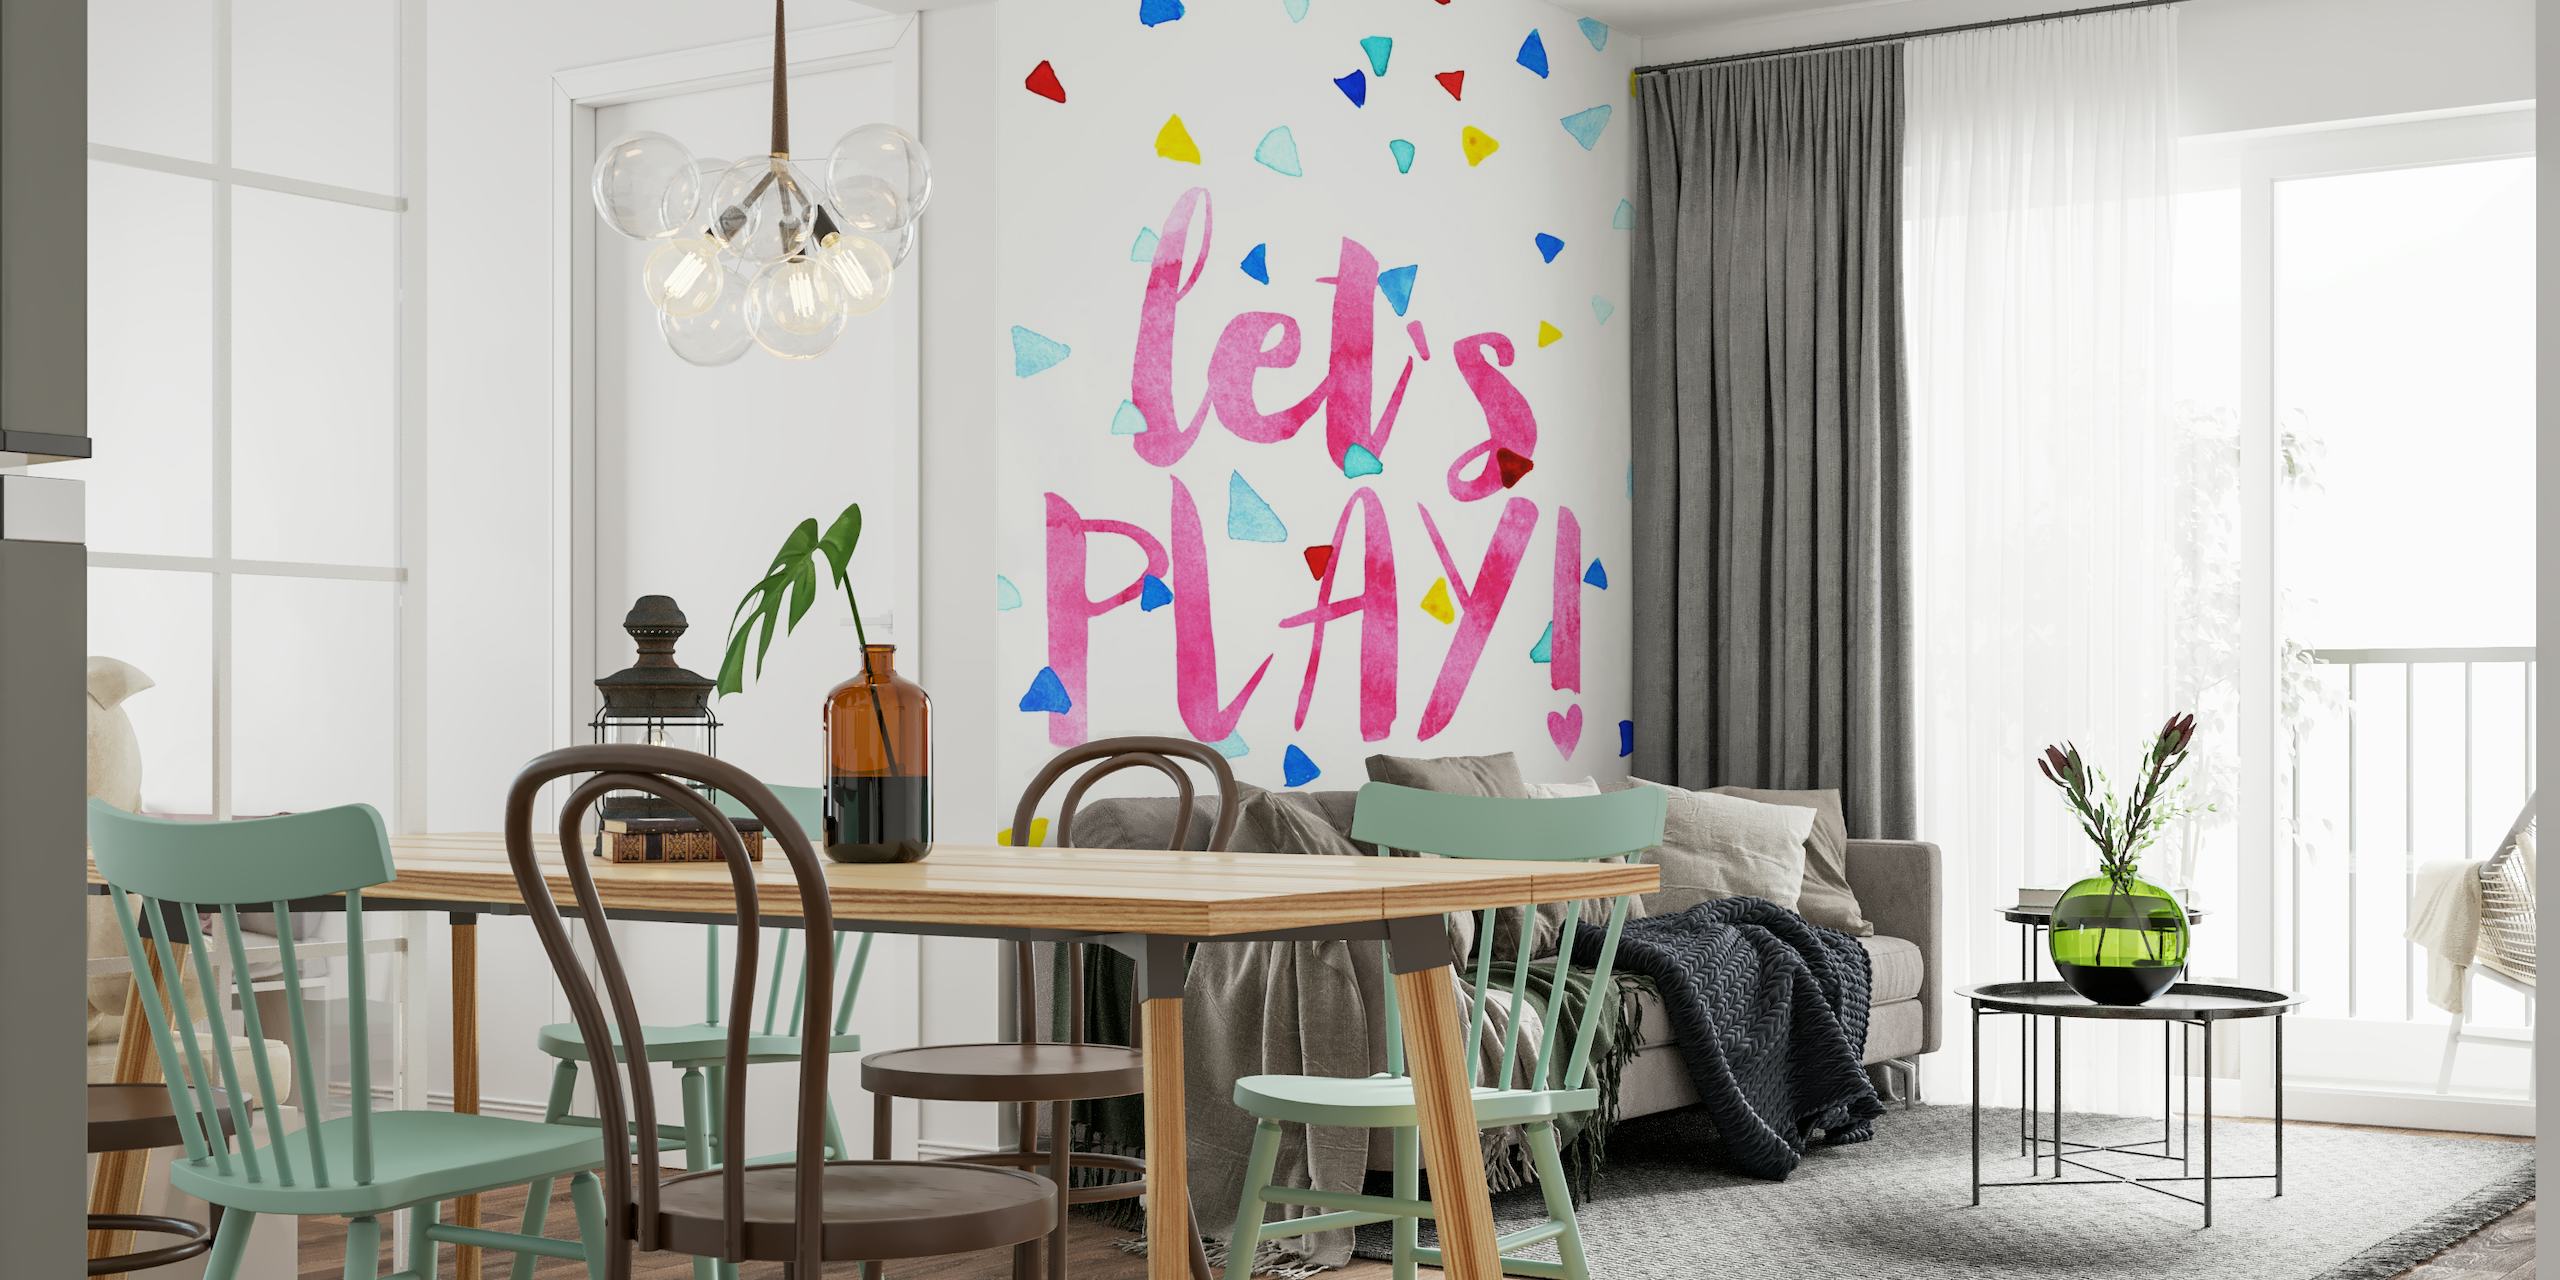 Let`s Play! wallpaper